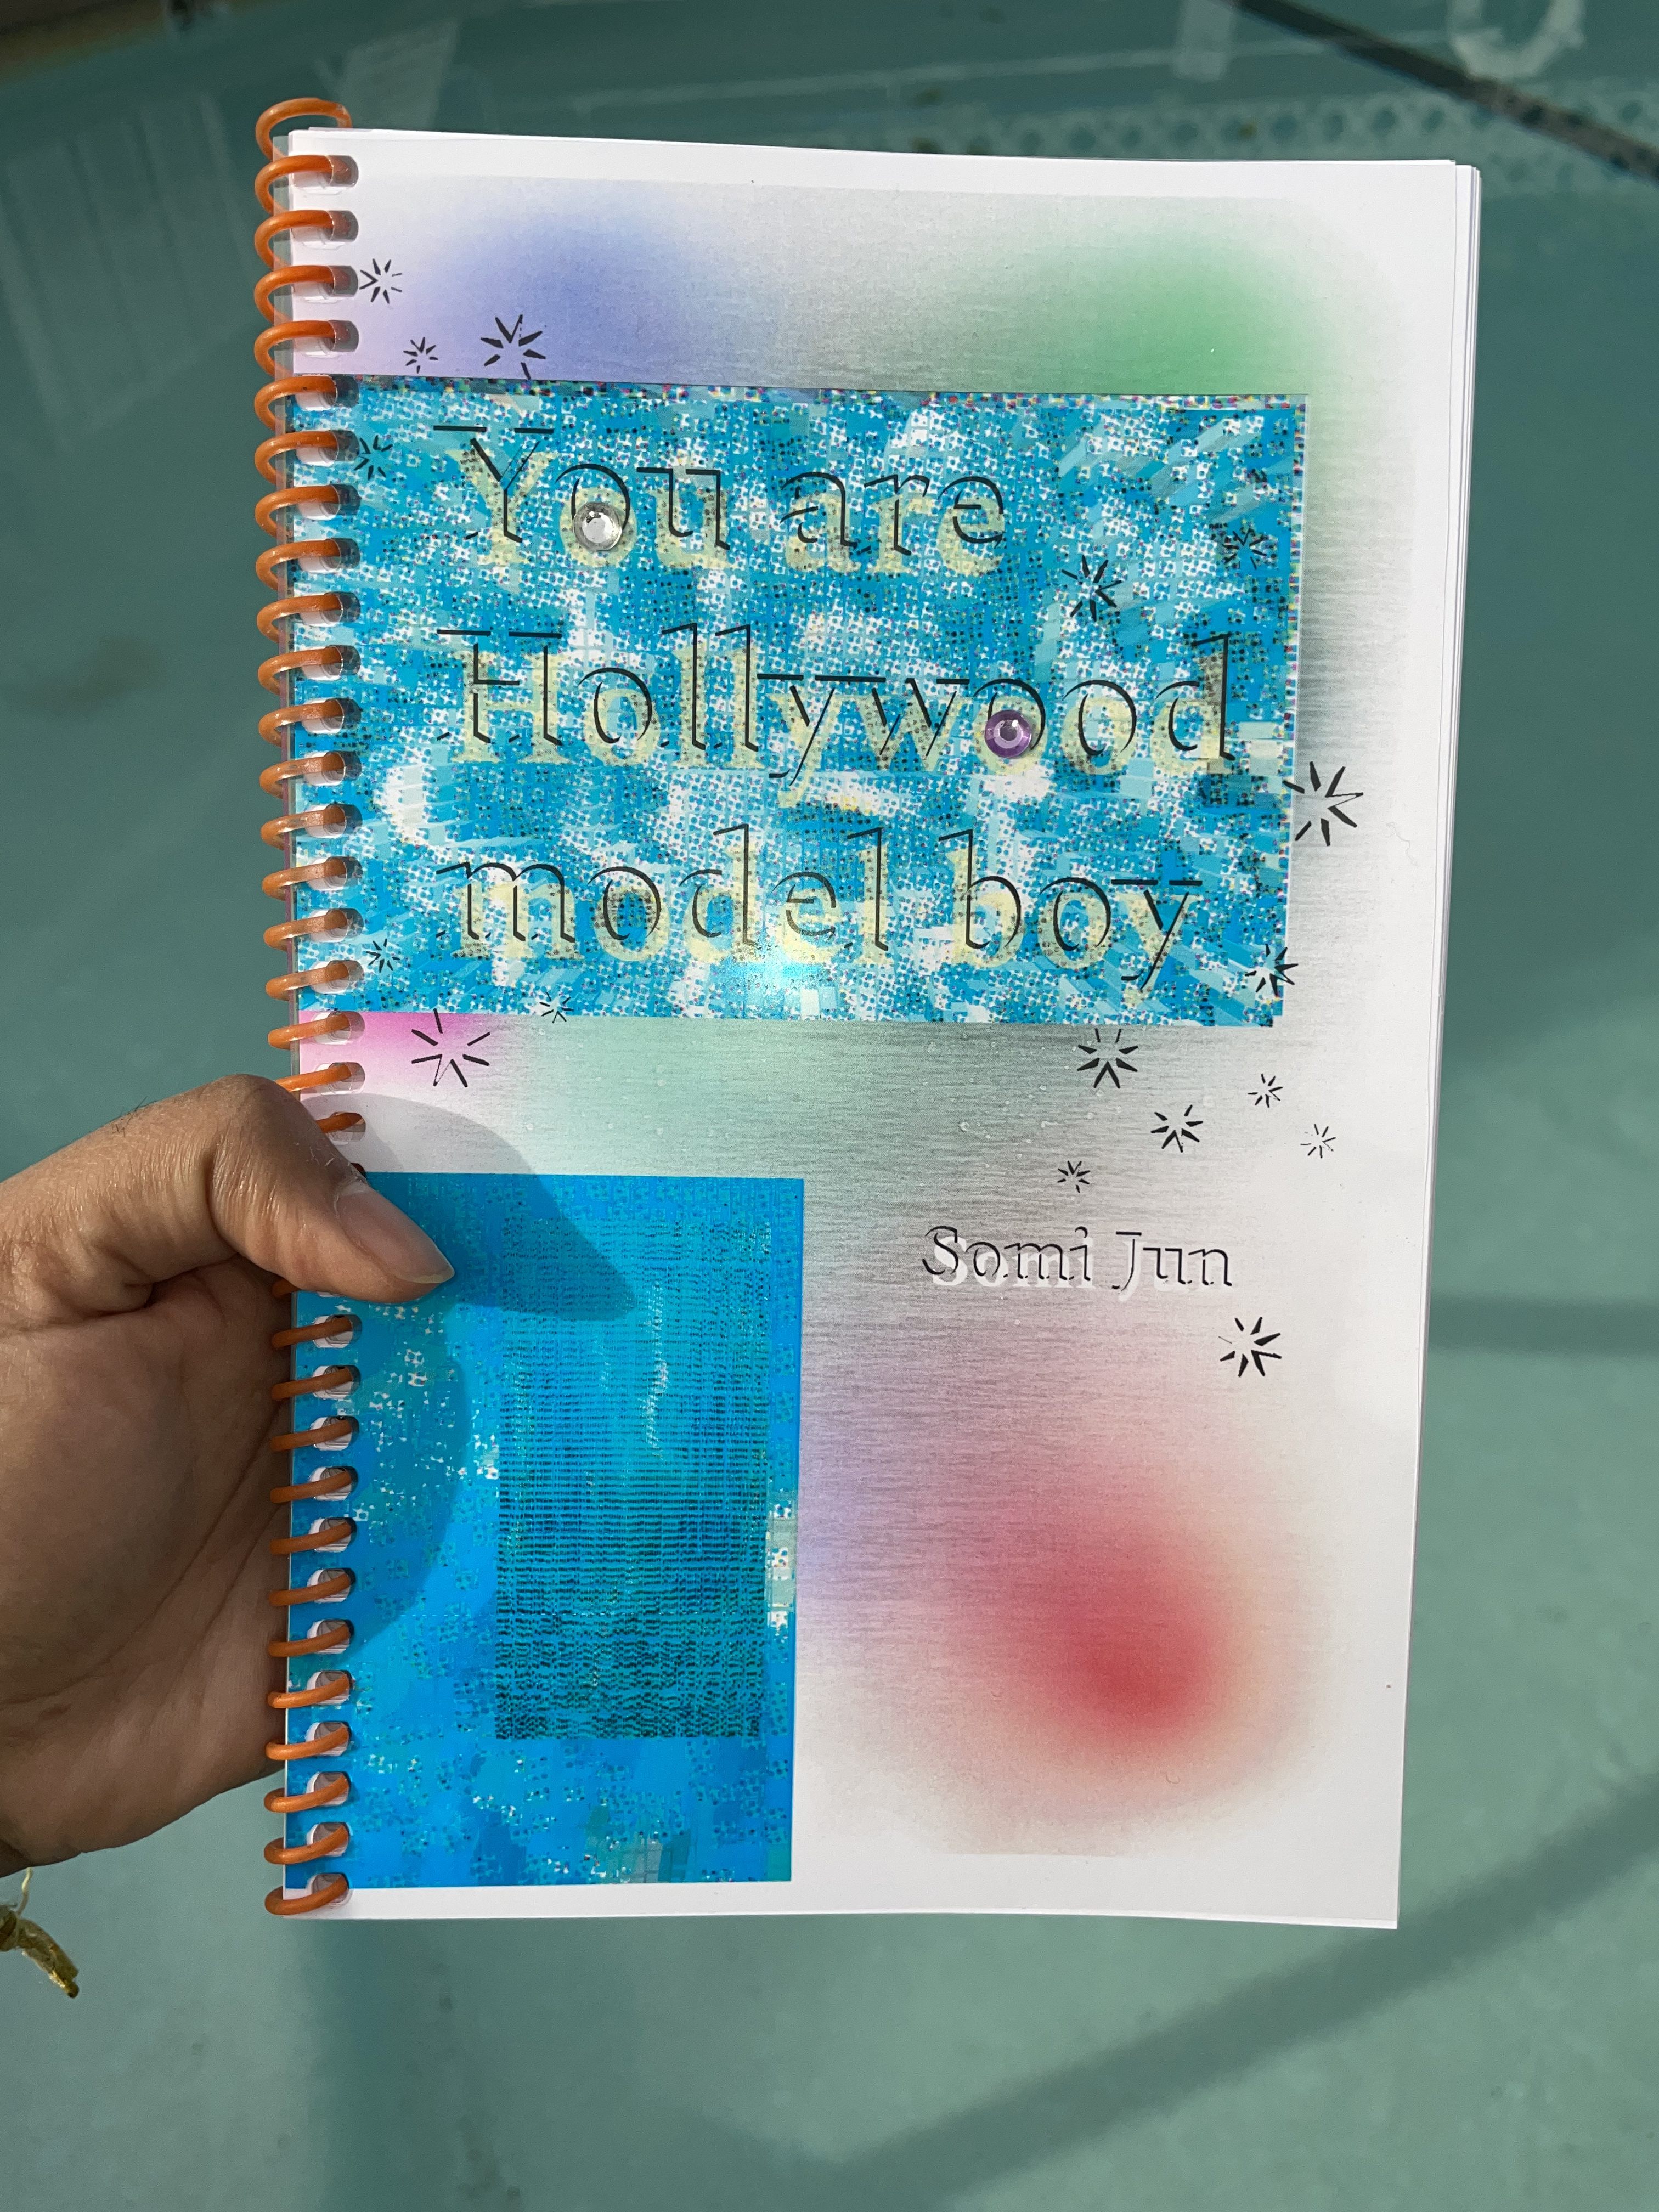 a spiral bound book with a blue, green, red, and purple cover that reads 'You are Hollywood model boy' is held out over a swimming pool